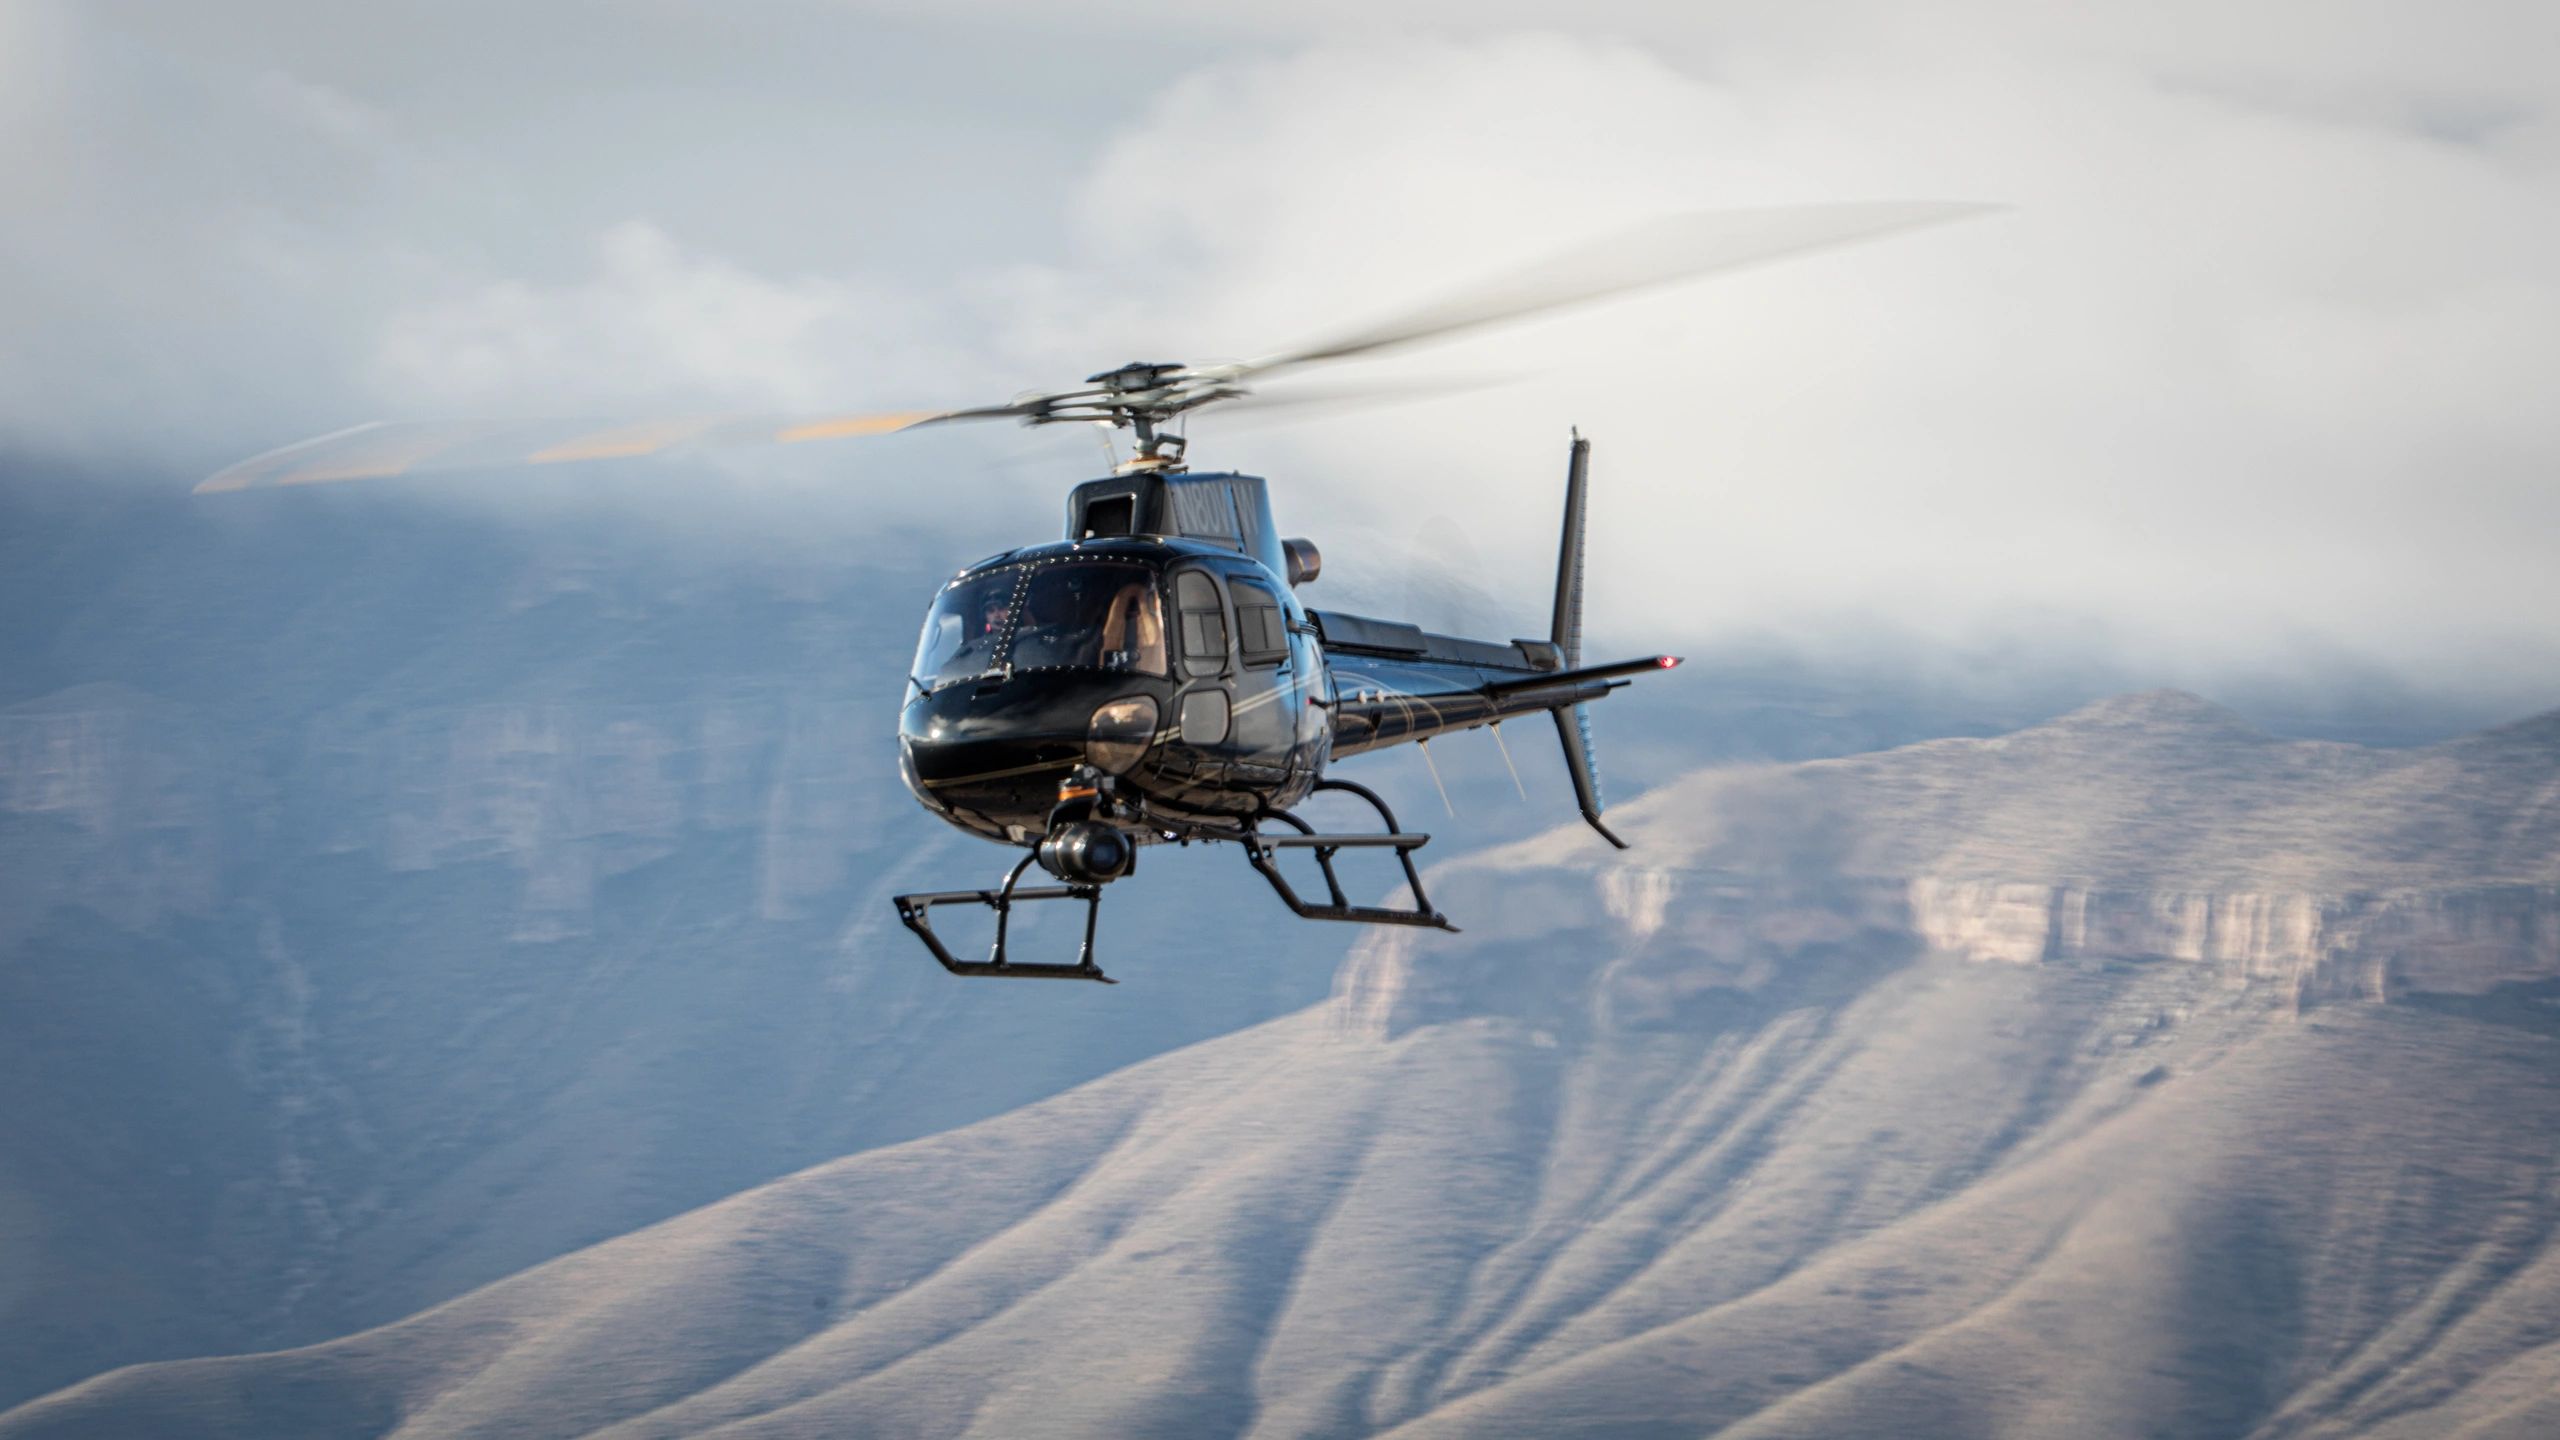 Black Ops Aviation - Aerial Film Production, Helicopter Aerials